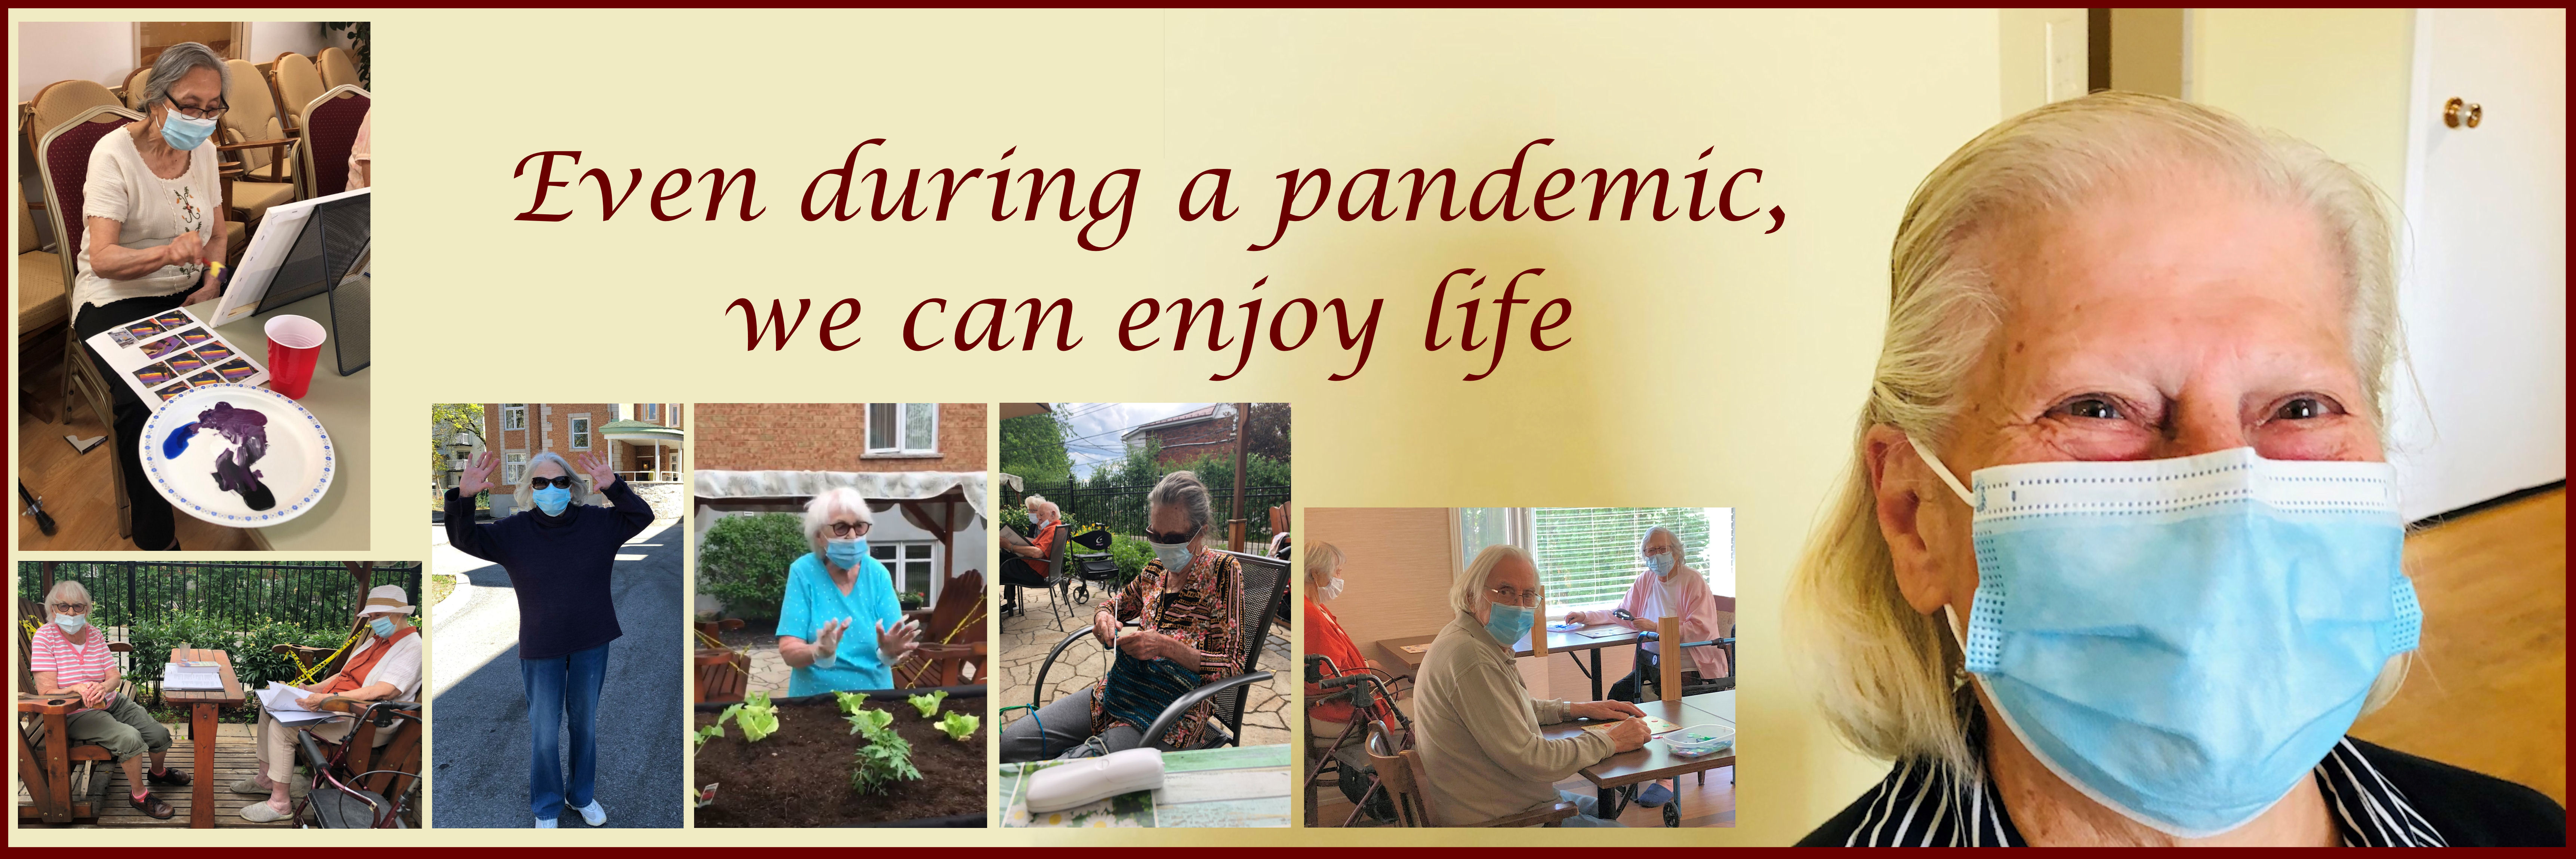 Even during a pandemic, we can enjoy life